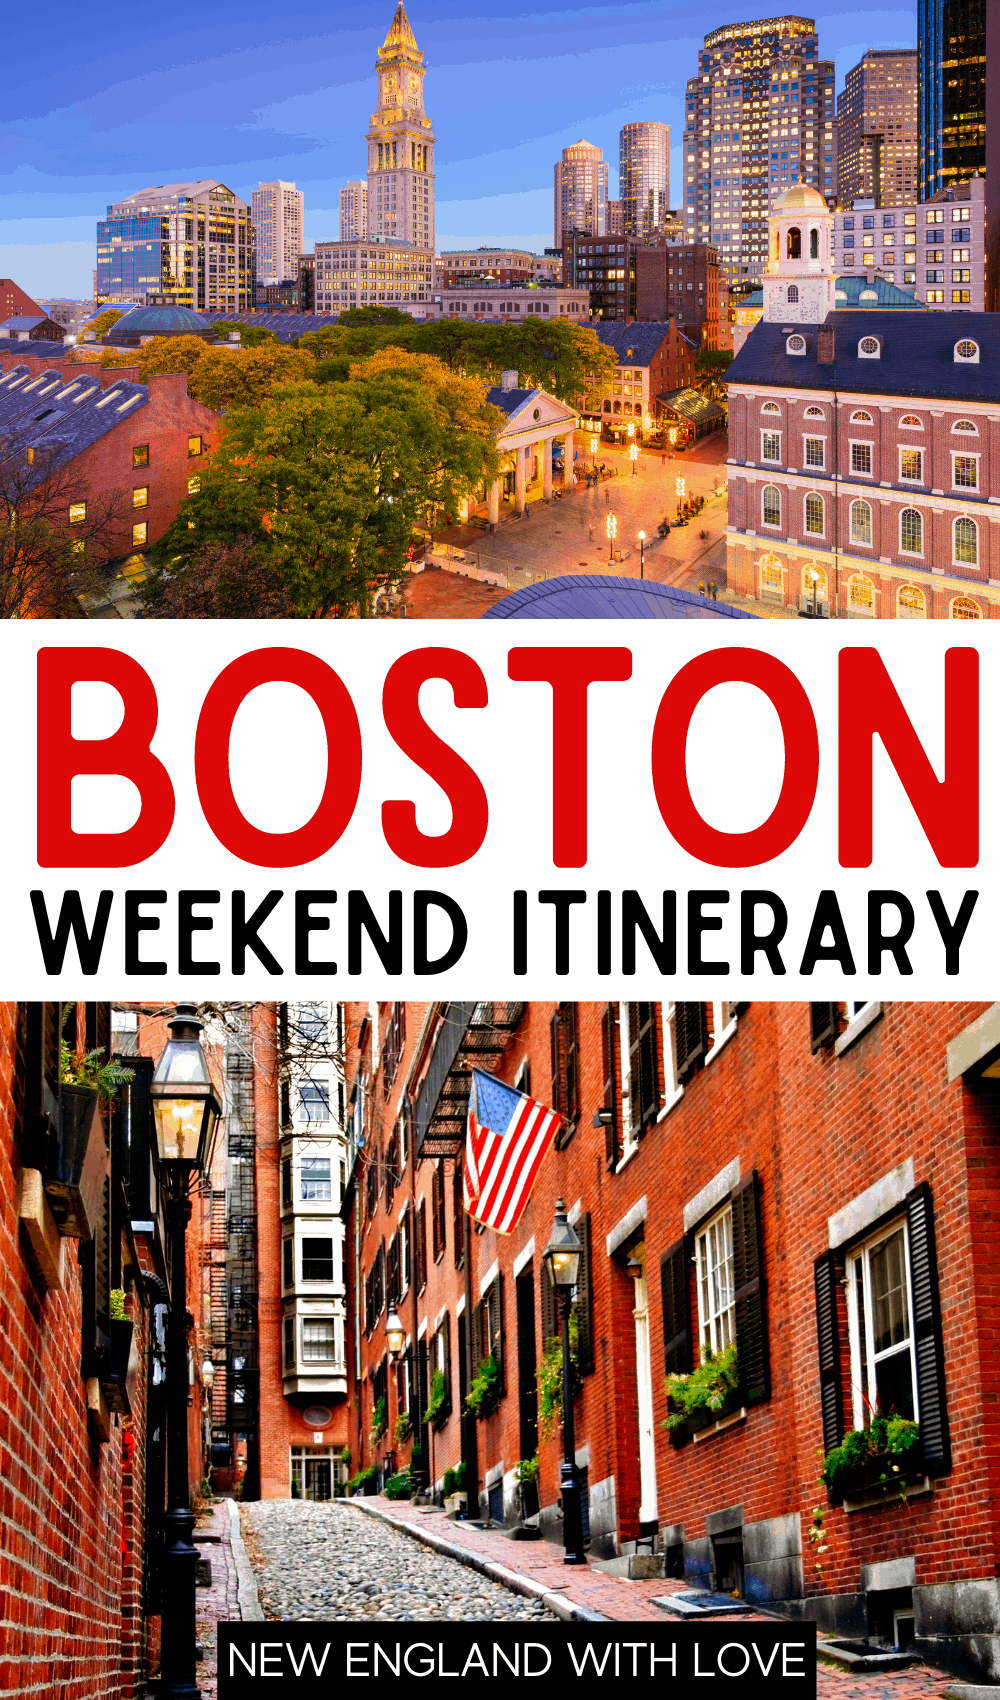 Pinterest graphic reading "BOSTON WEEKEND ITINERARY"